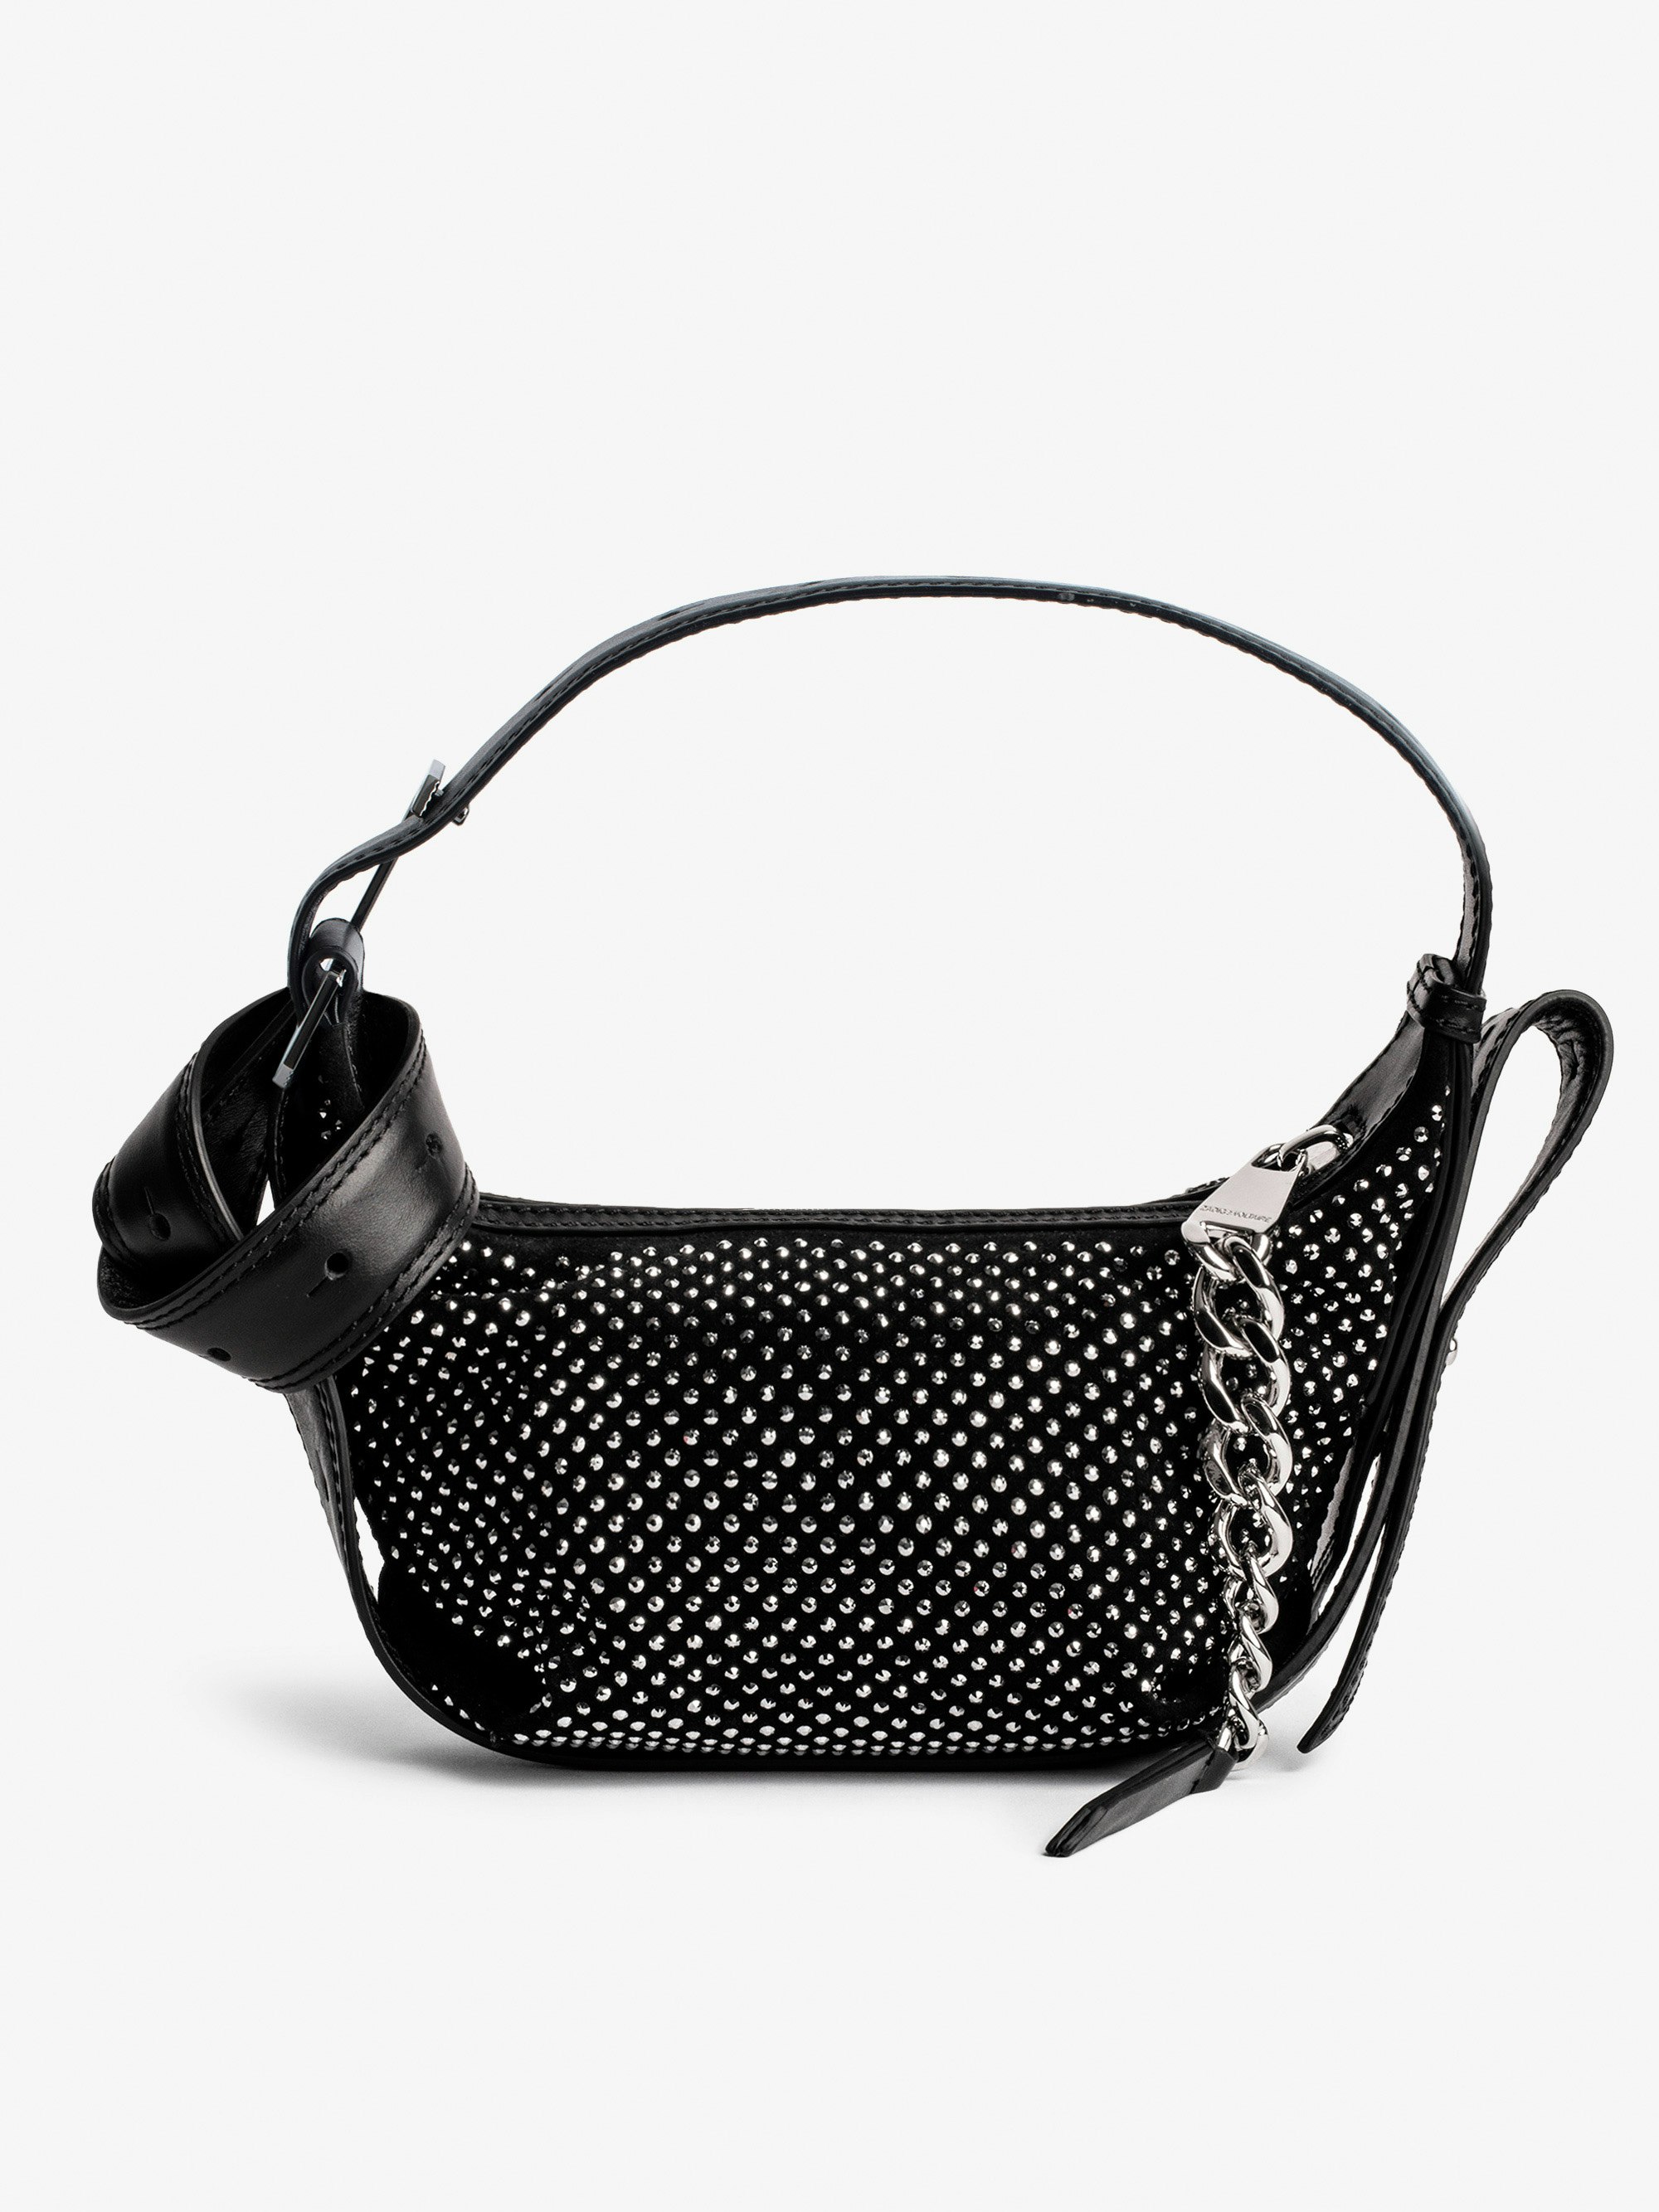 Le Cecilia XS Bag Strass - Women's black suede shoulder bag with rhinestones. Buying this product, you support a responsible leather production through Leather Working Group.